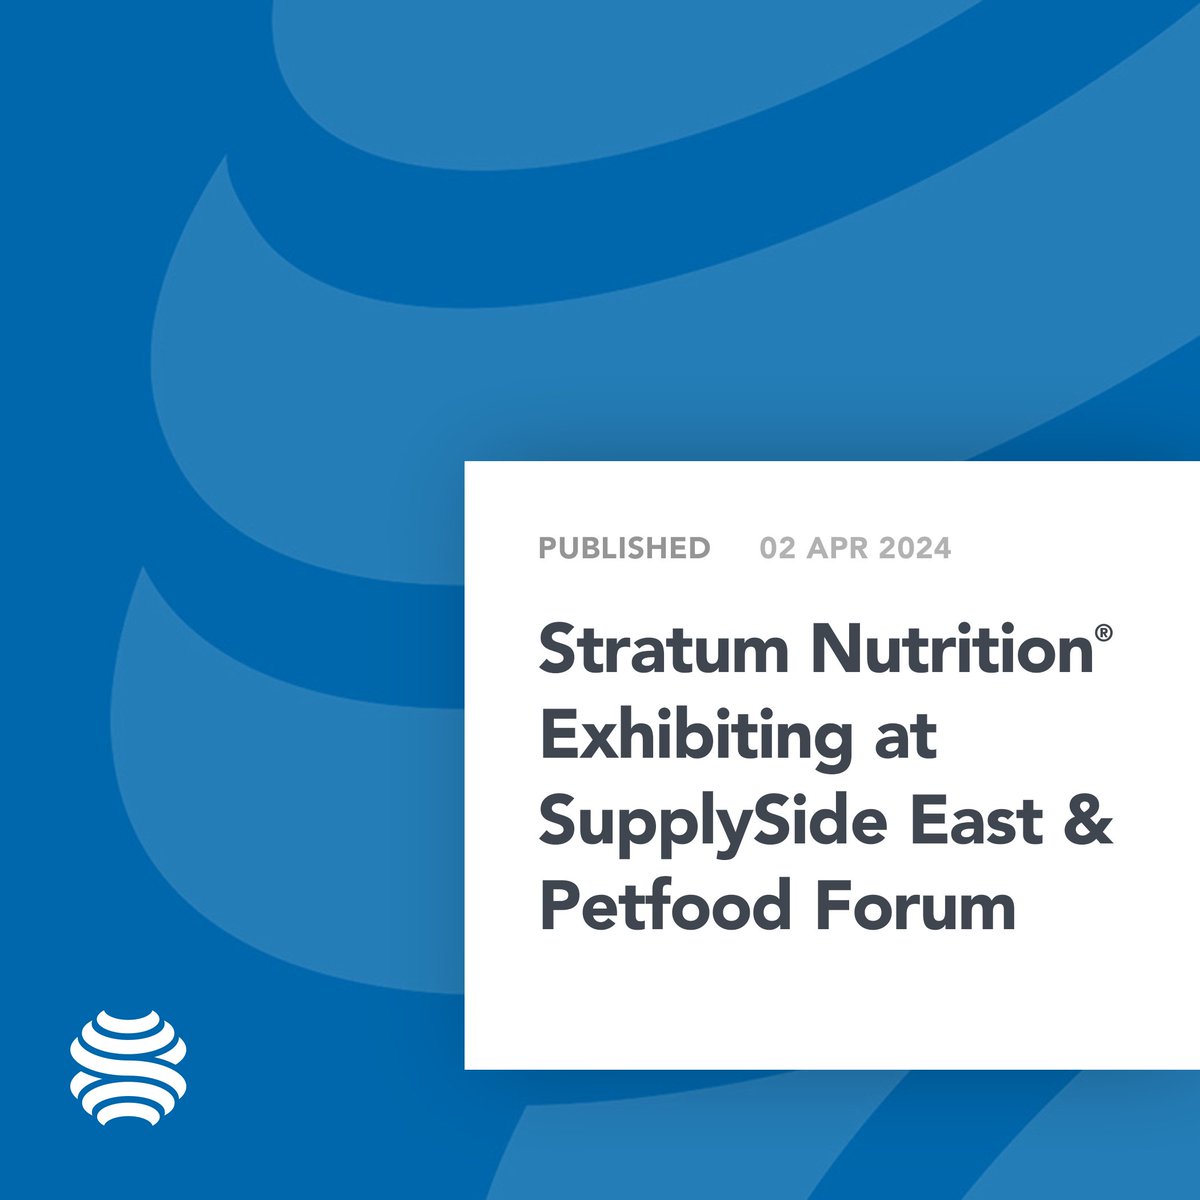 The Stratum Nutrition® team is headed to SupplySide East and Petfood Forum! 

For more information: stratumnutrition.com/resources/post…

#stratumnutrition #supplyside #petfoodforum #newjersey #kansascitymo